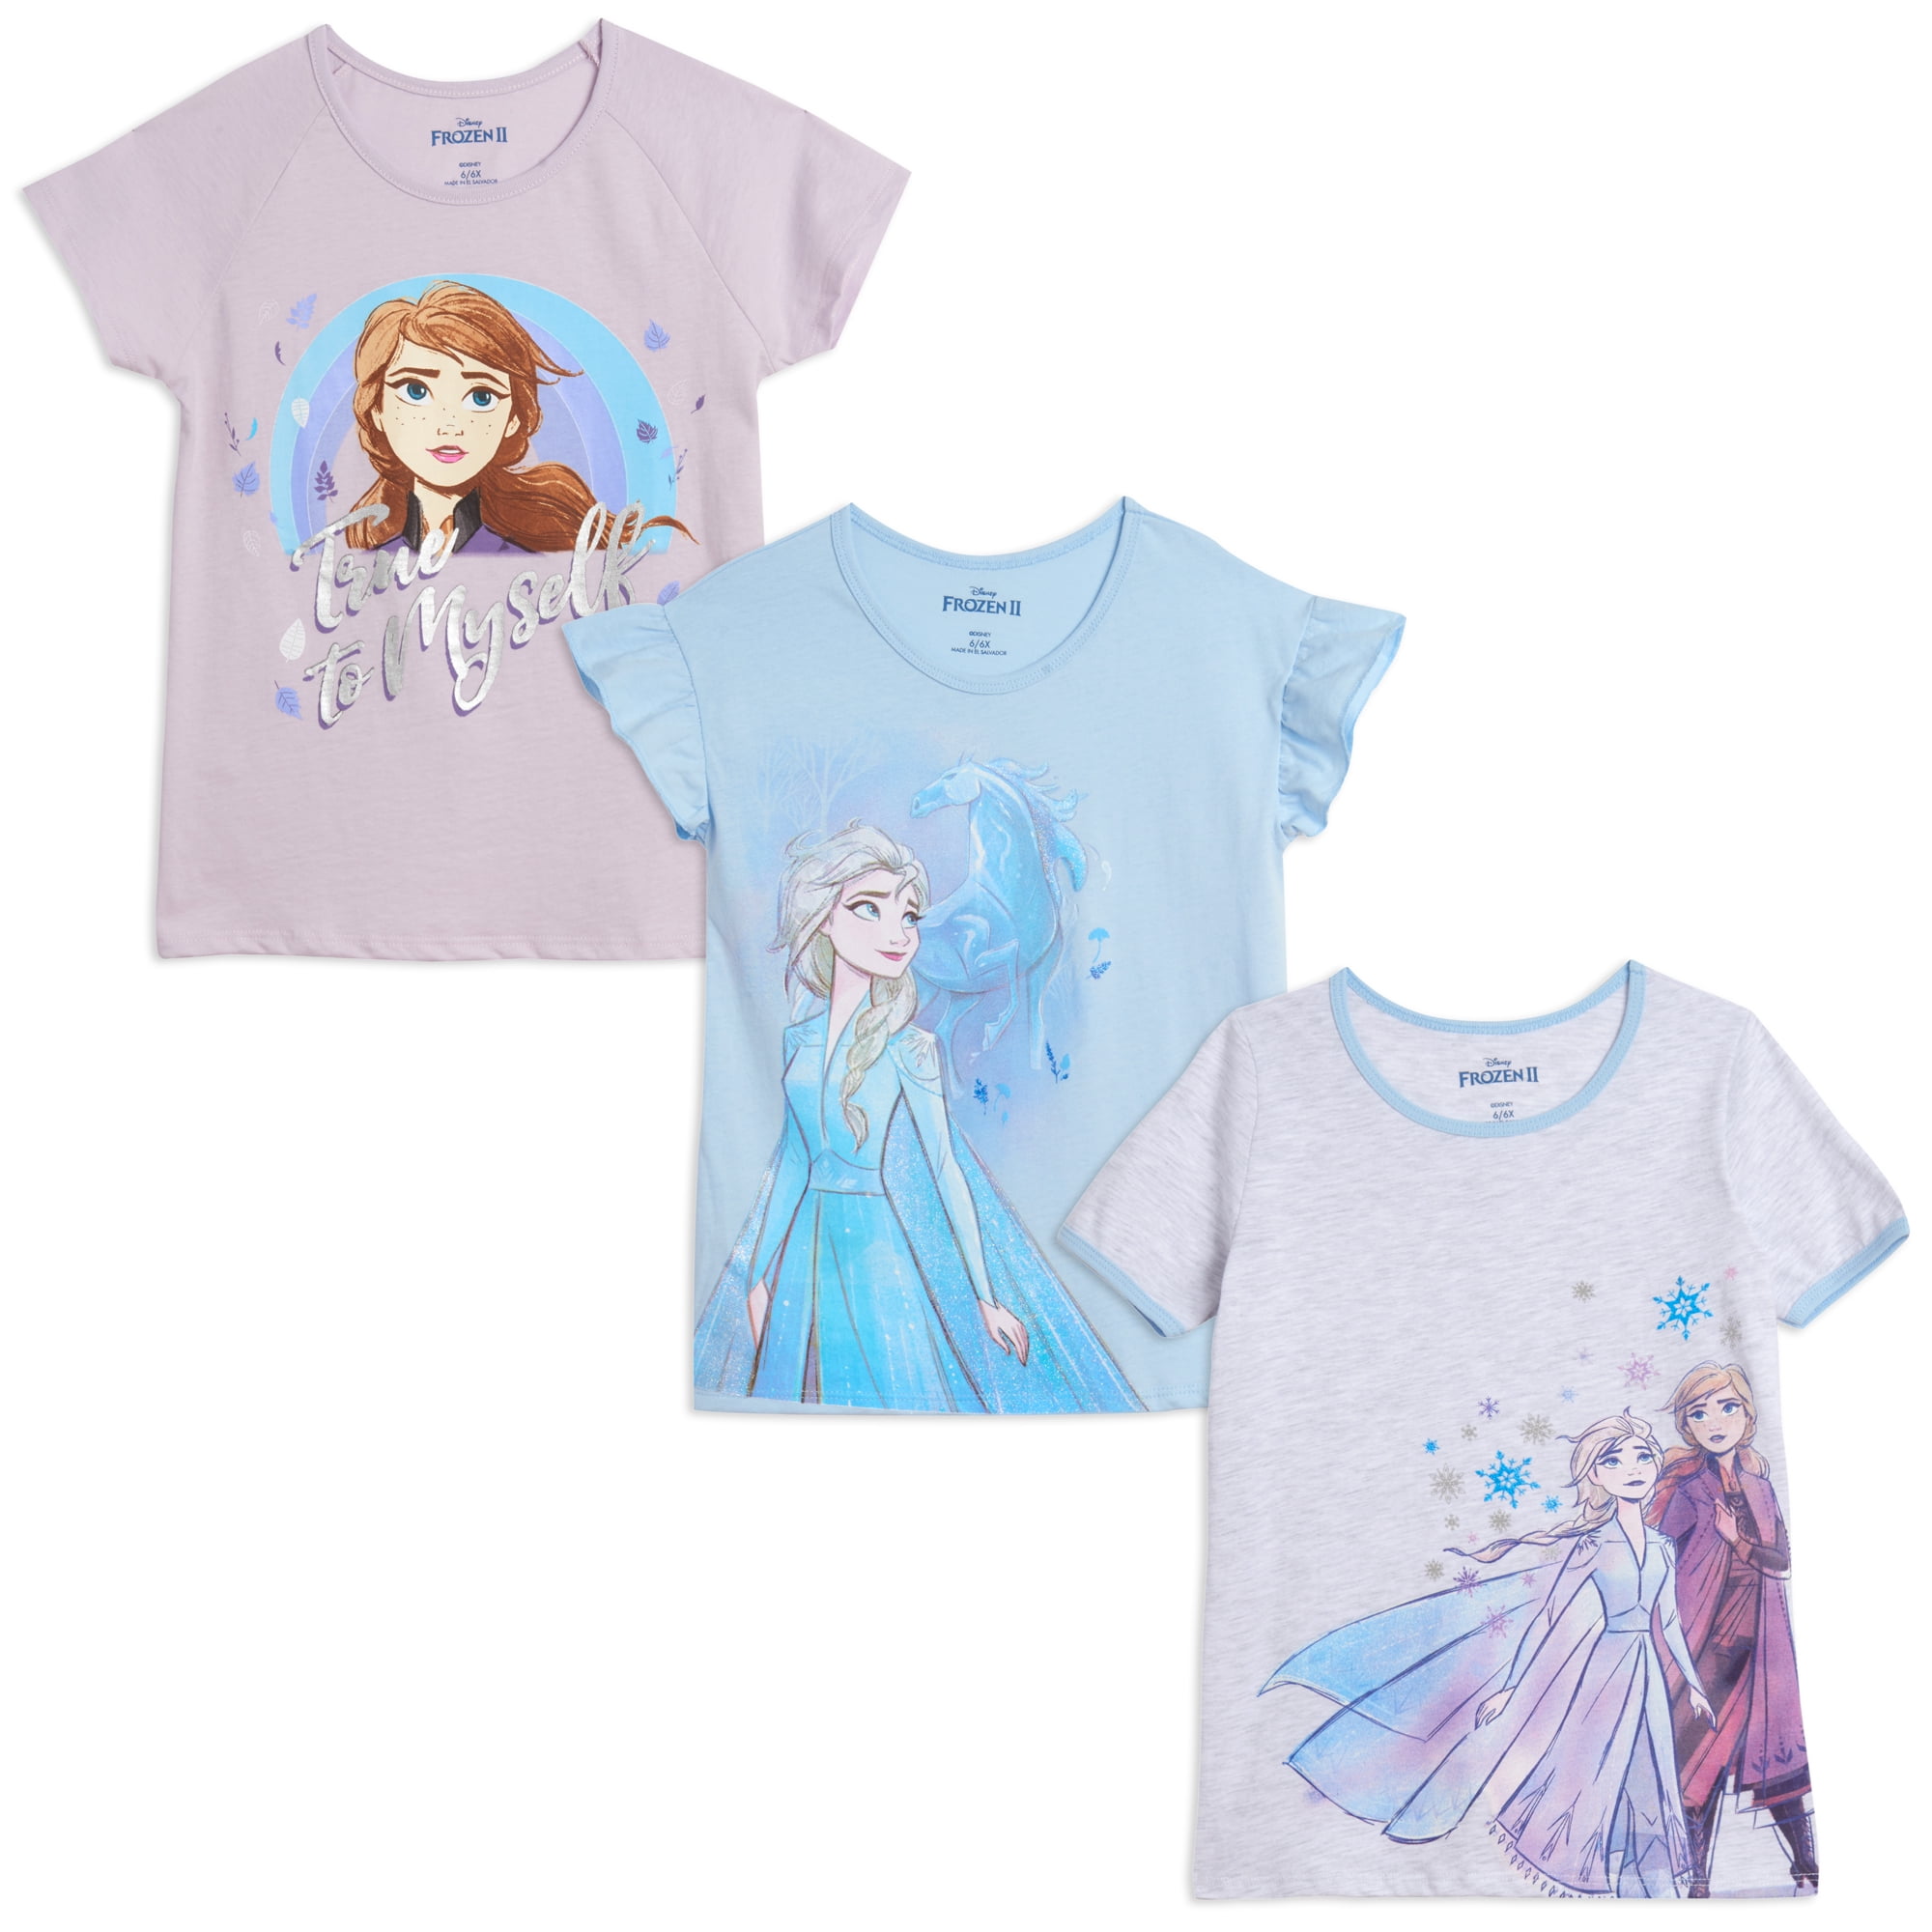 Disney Official Licensed Girls Frozen Elsa AnnaTop Tshirt Age 2 to 8 Years 